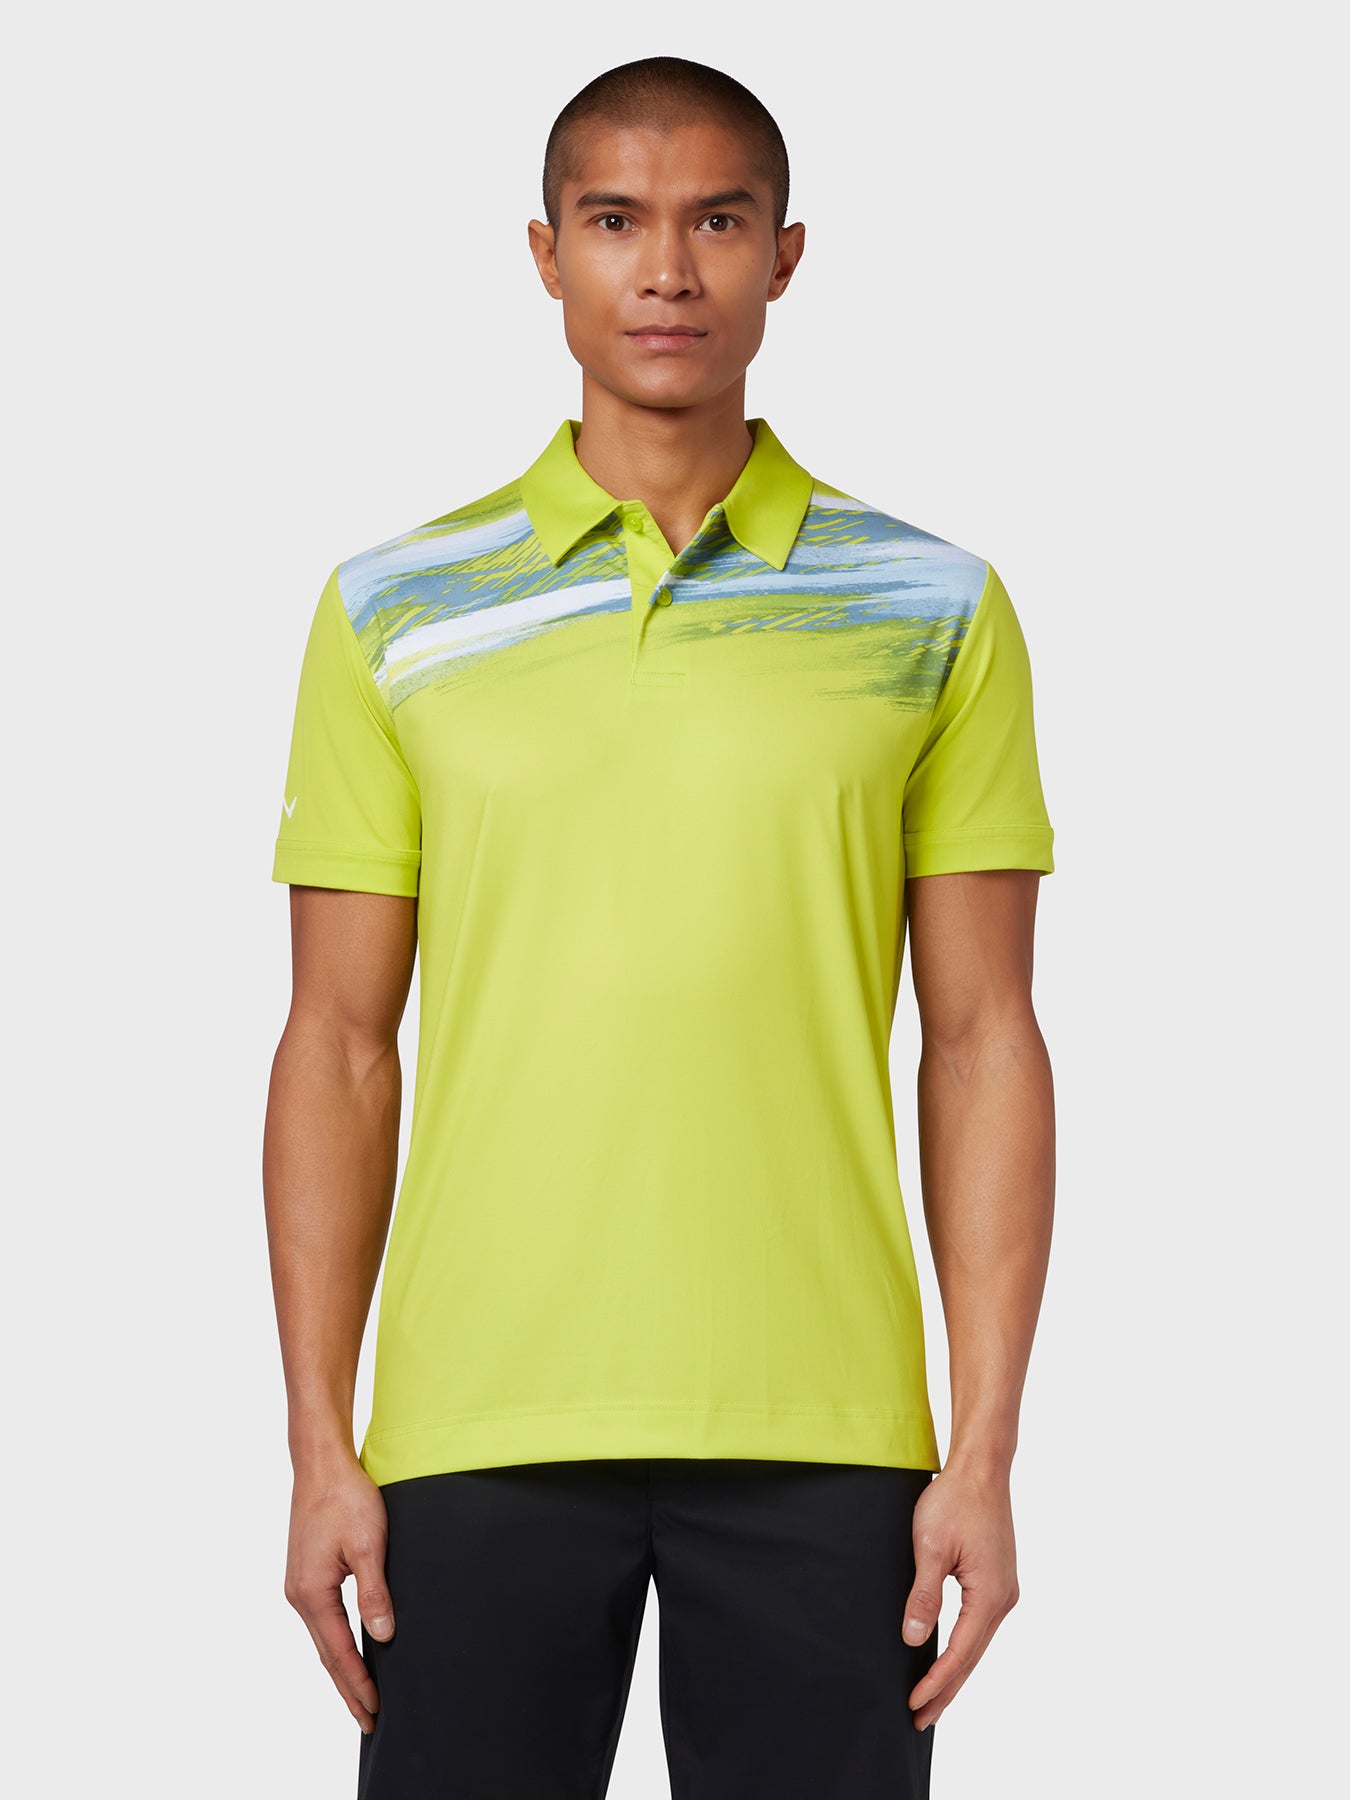 View X Series Active Textured Print Polo In Lime Punch Lime Punch S information